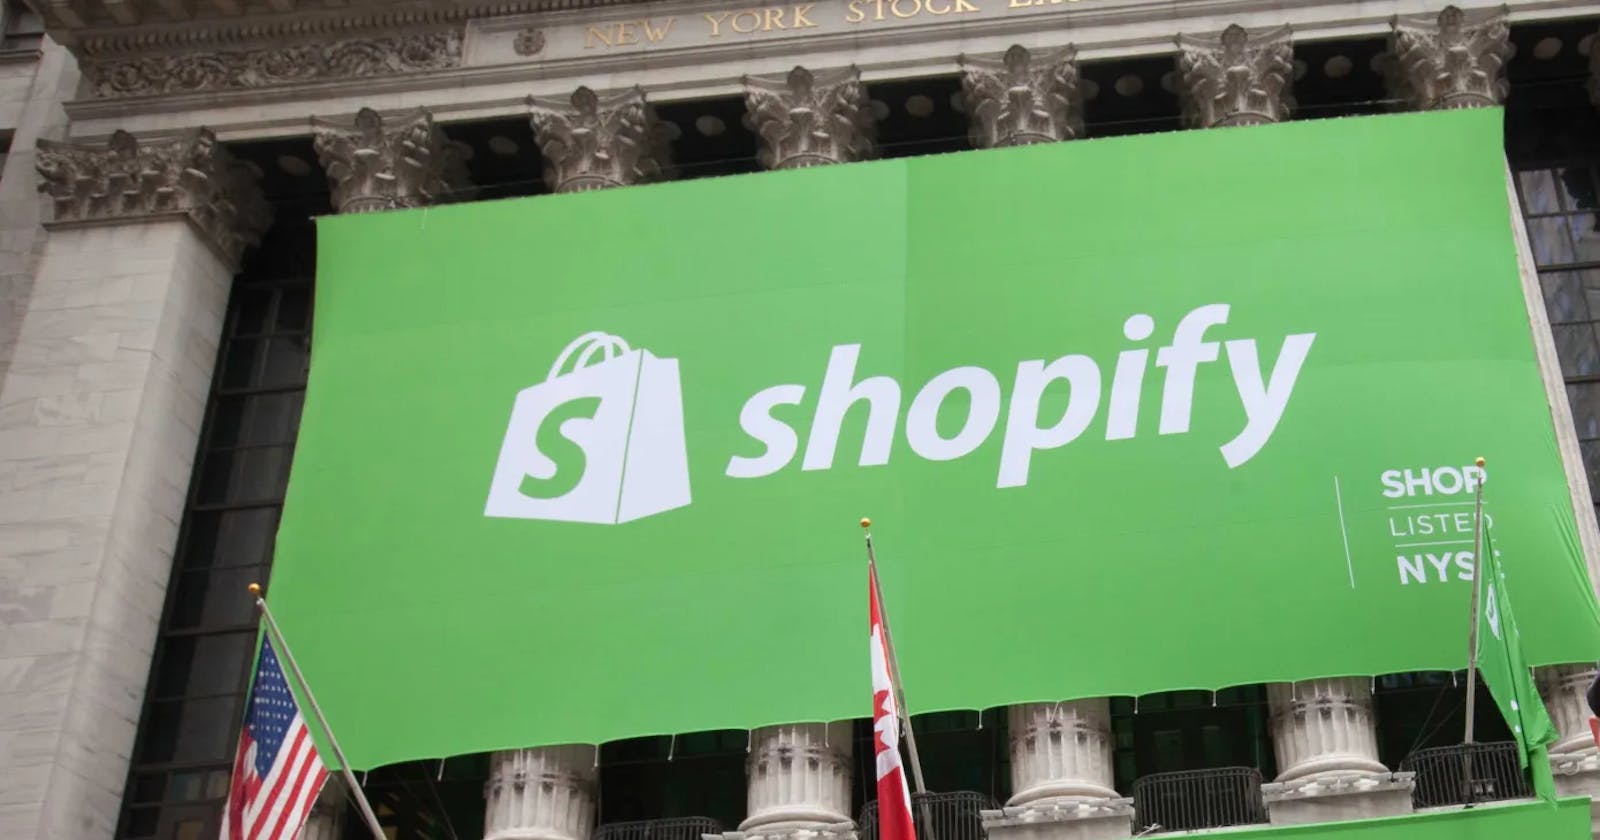 Shopify unveils new features, such as AI image editor, semantic search, and merchandising tools for its online store platform.